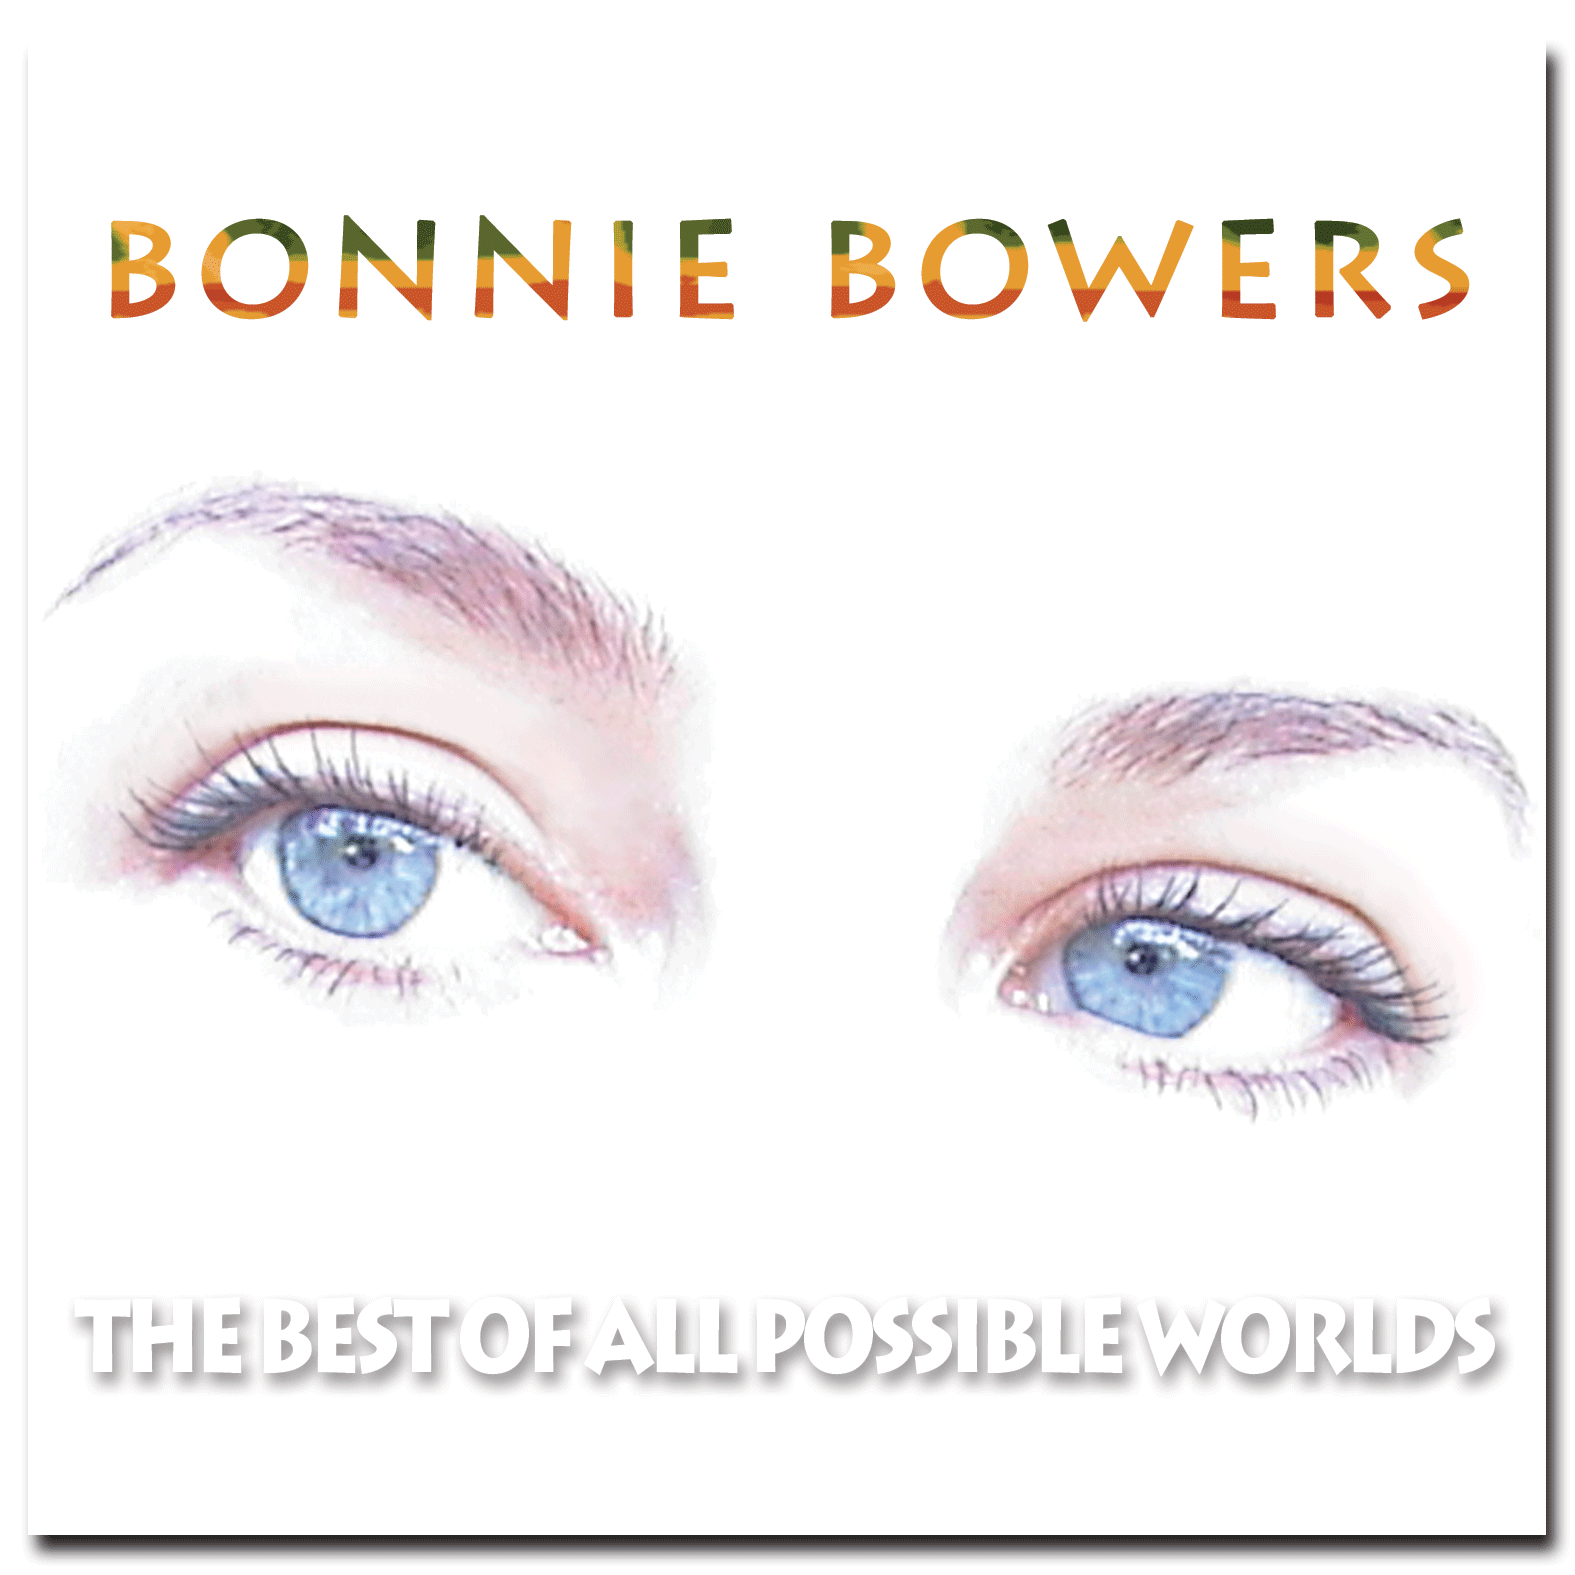 Bonnie Bowers The Best Of All Possible Worlds